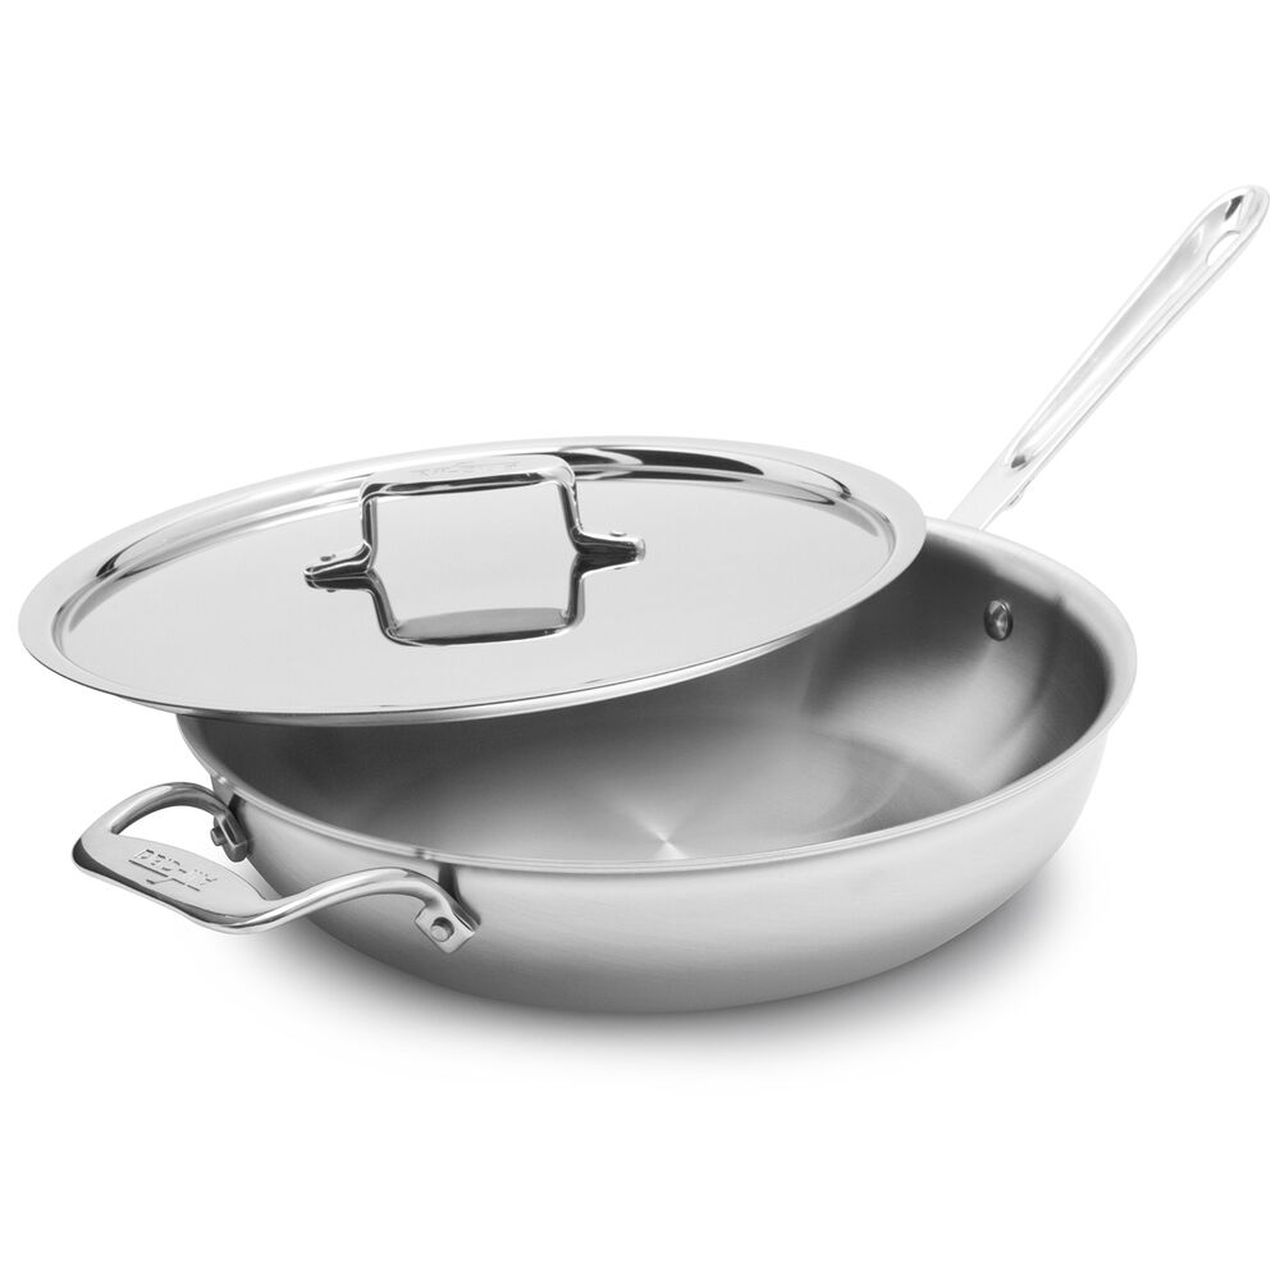 Silver All-Clad 440465 D3 Stainless Steel All-in-One Pan Cookware 4-Quart